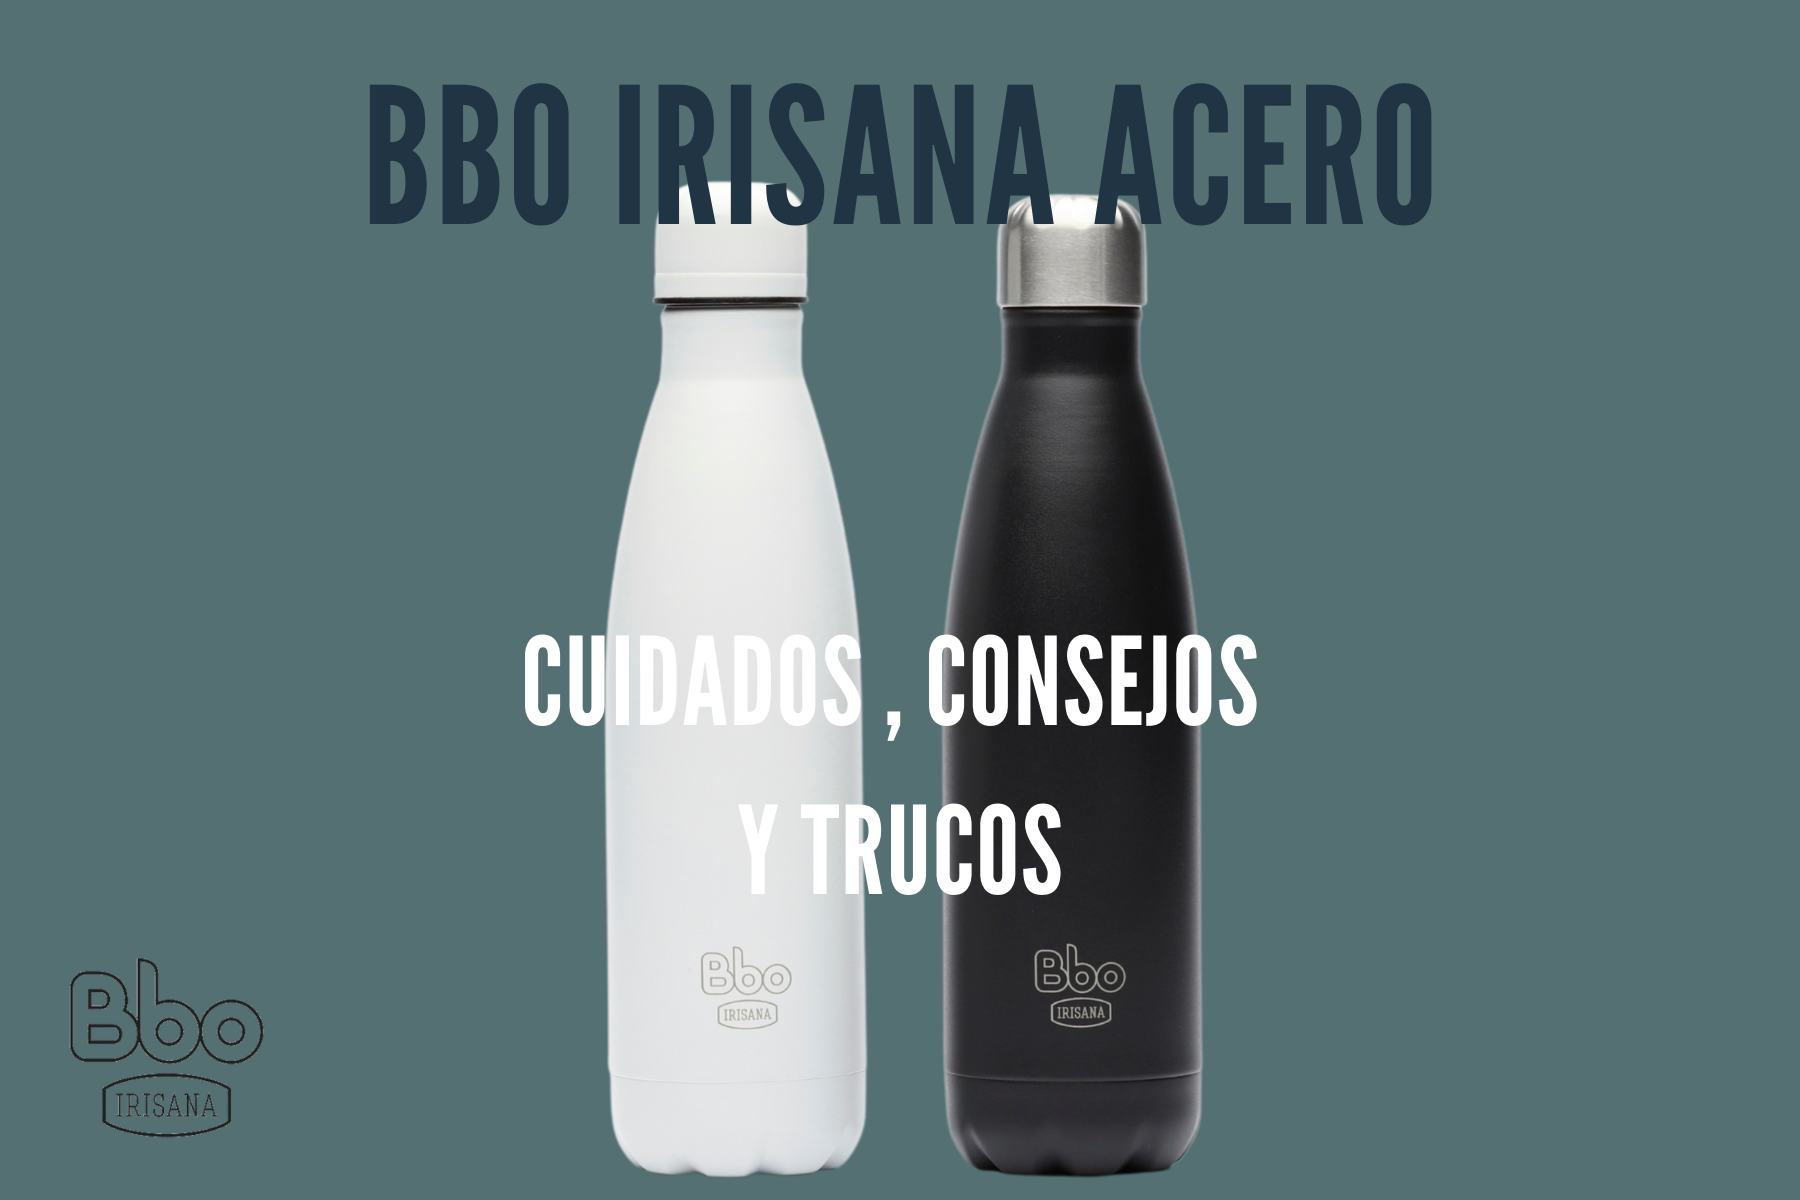 Advice, care and some tricks for your double-layer stainless steel Bbo Irisana bottle